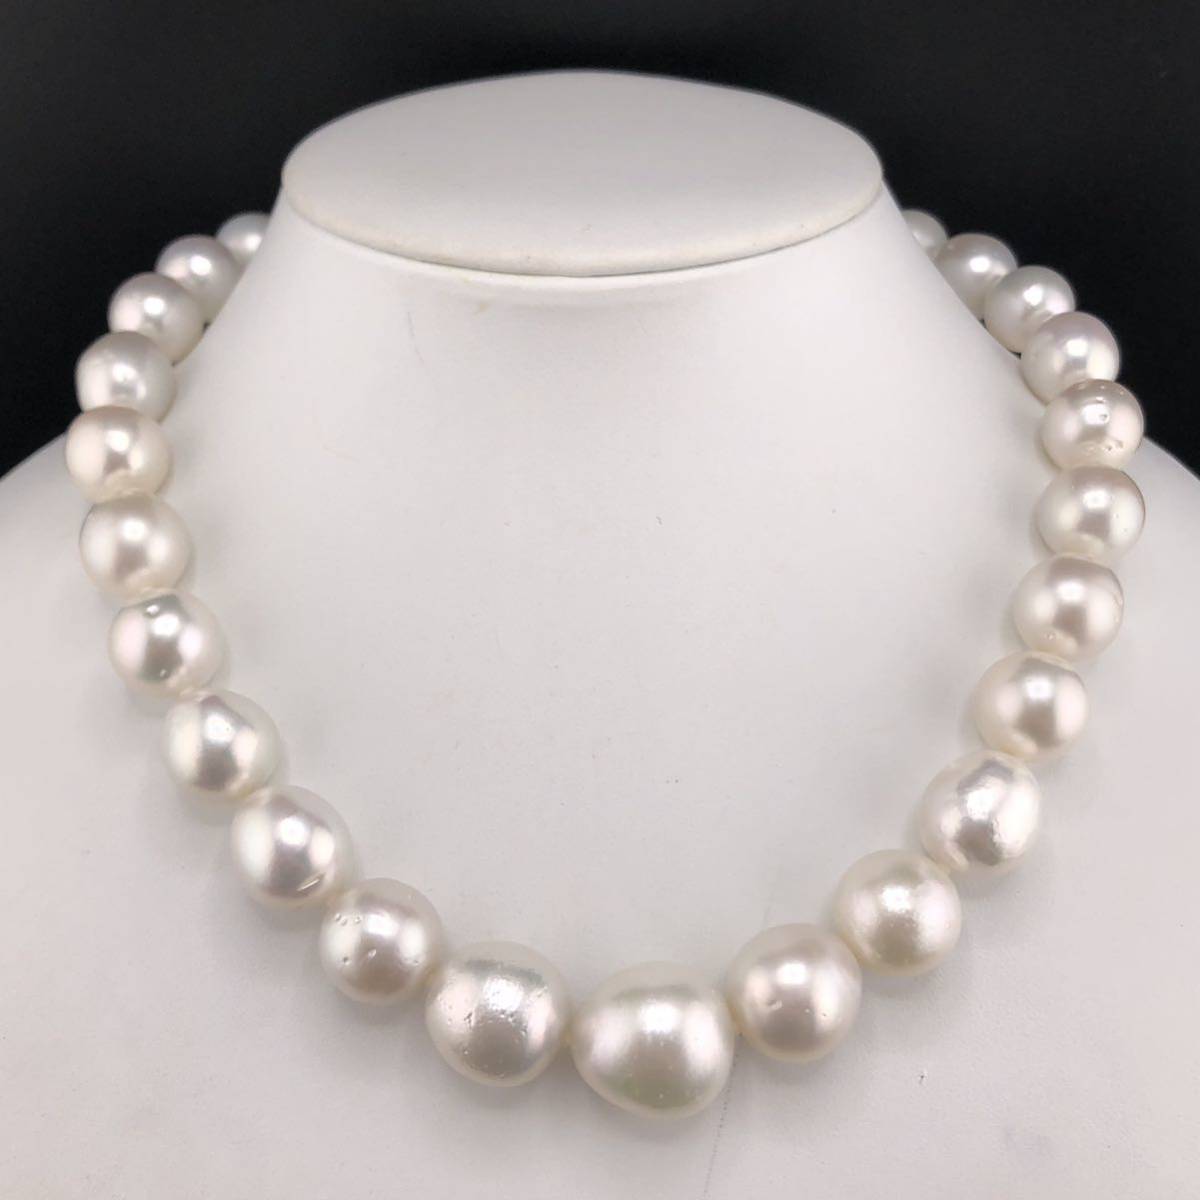 P11-0038 超特大！！南洋パールネックレス 12.0mm~18.00mm 47cm 125.0g (南洋 Pearl necklace SILVER )_画像1